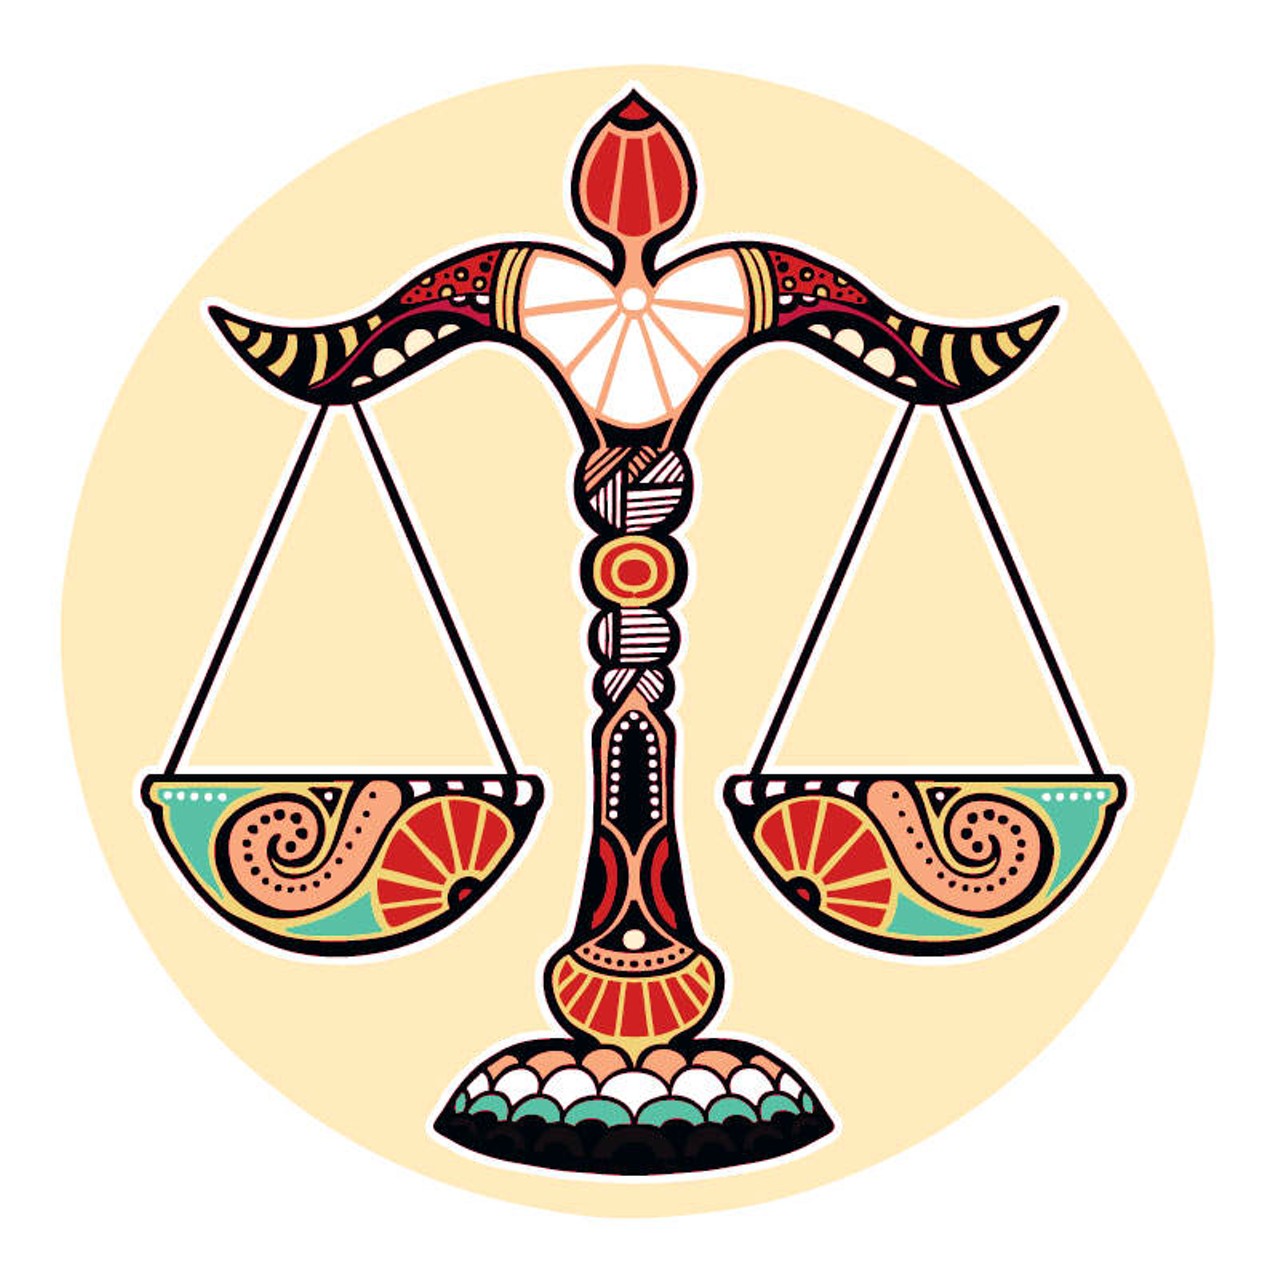 LIBRA (Sept. 21-Oct. 20):
The "whiff" of third-party interference is all over your story right now. As you weave your way through the B.S. that shows up in this neck of the woods, you're totally sure you've got it all figured out. The need to be 100 percent conscious of your motives is huge. For the next six months, you have all the freedom in the world to explore what happens when someone (or something) else enters the equation. Forewarned is forearmed. To approach this scenario from the standpoint of sweetness and light is insane. What is now a "whiff" is due to turn into a hurricane.